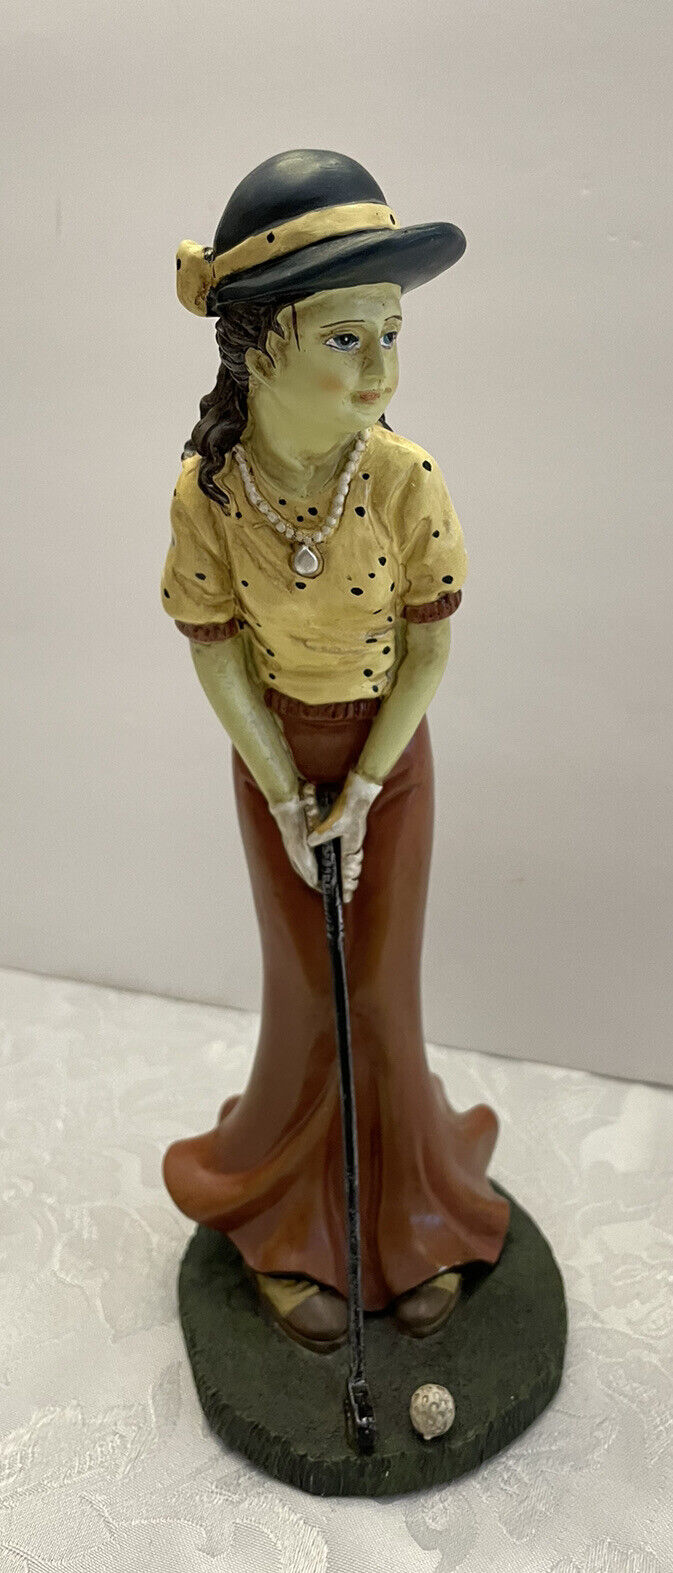 Lady Golfer Statue Victorian Themed Resin Figurine Statue 10 Inches